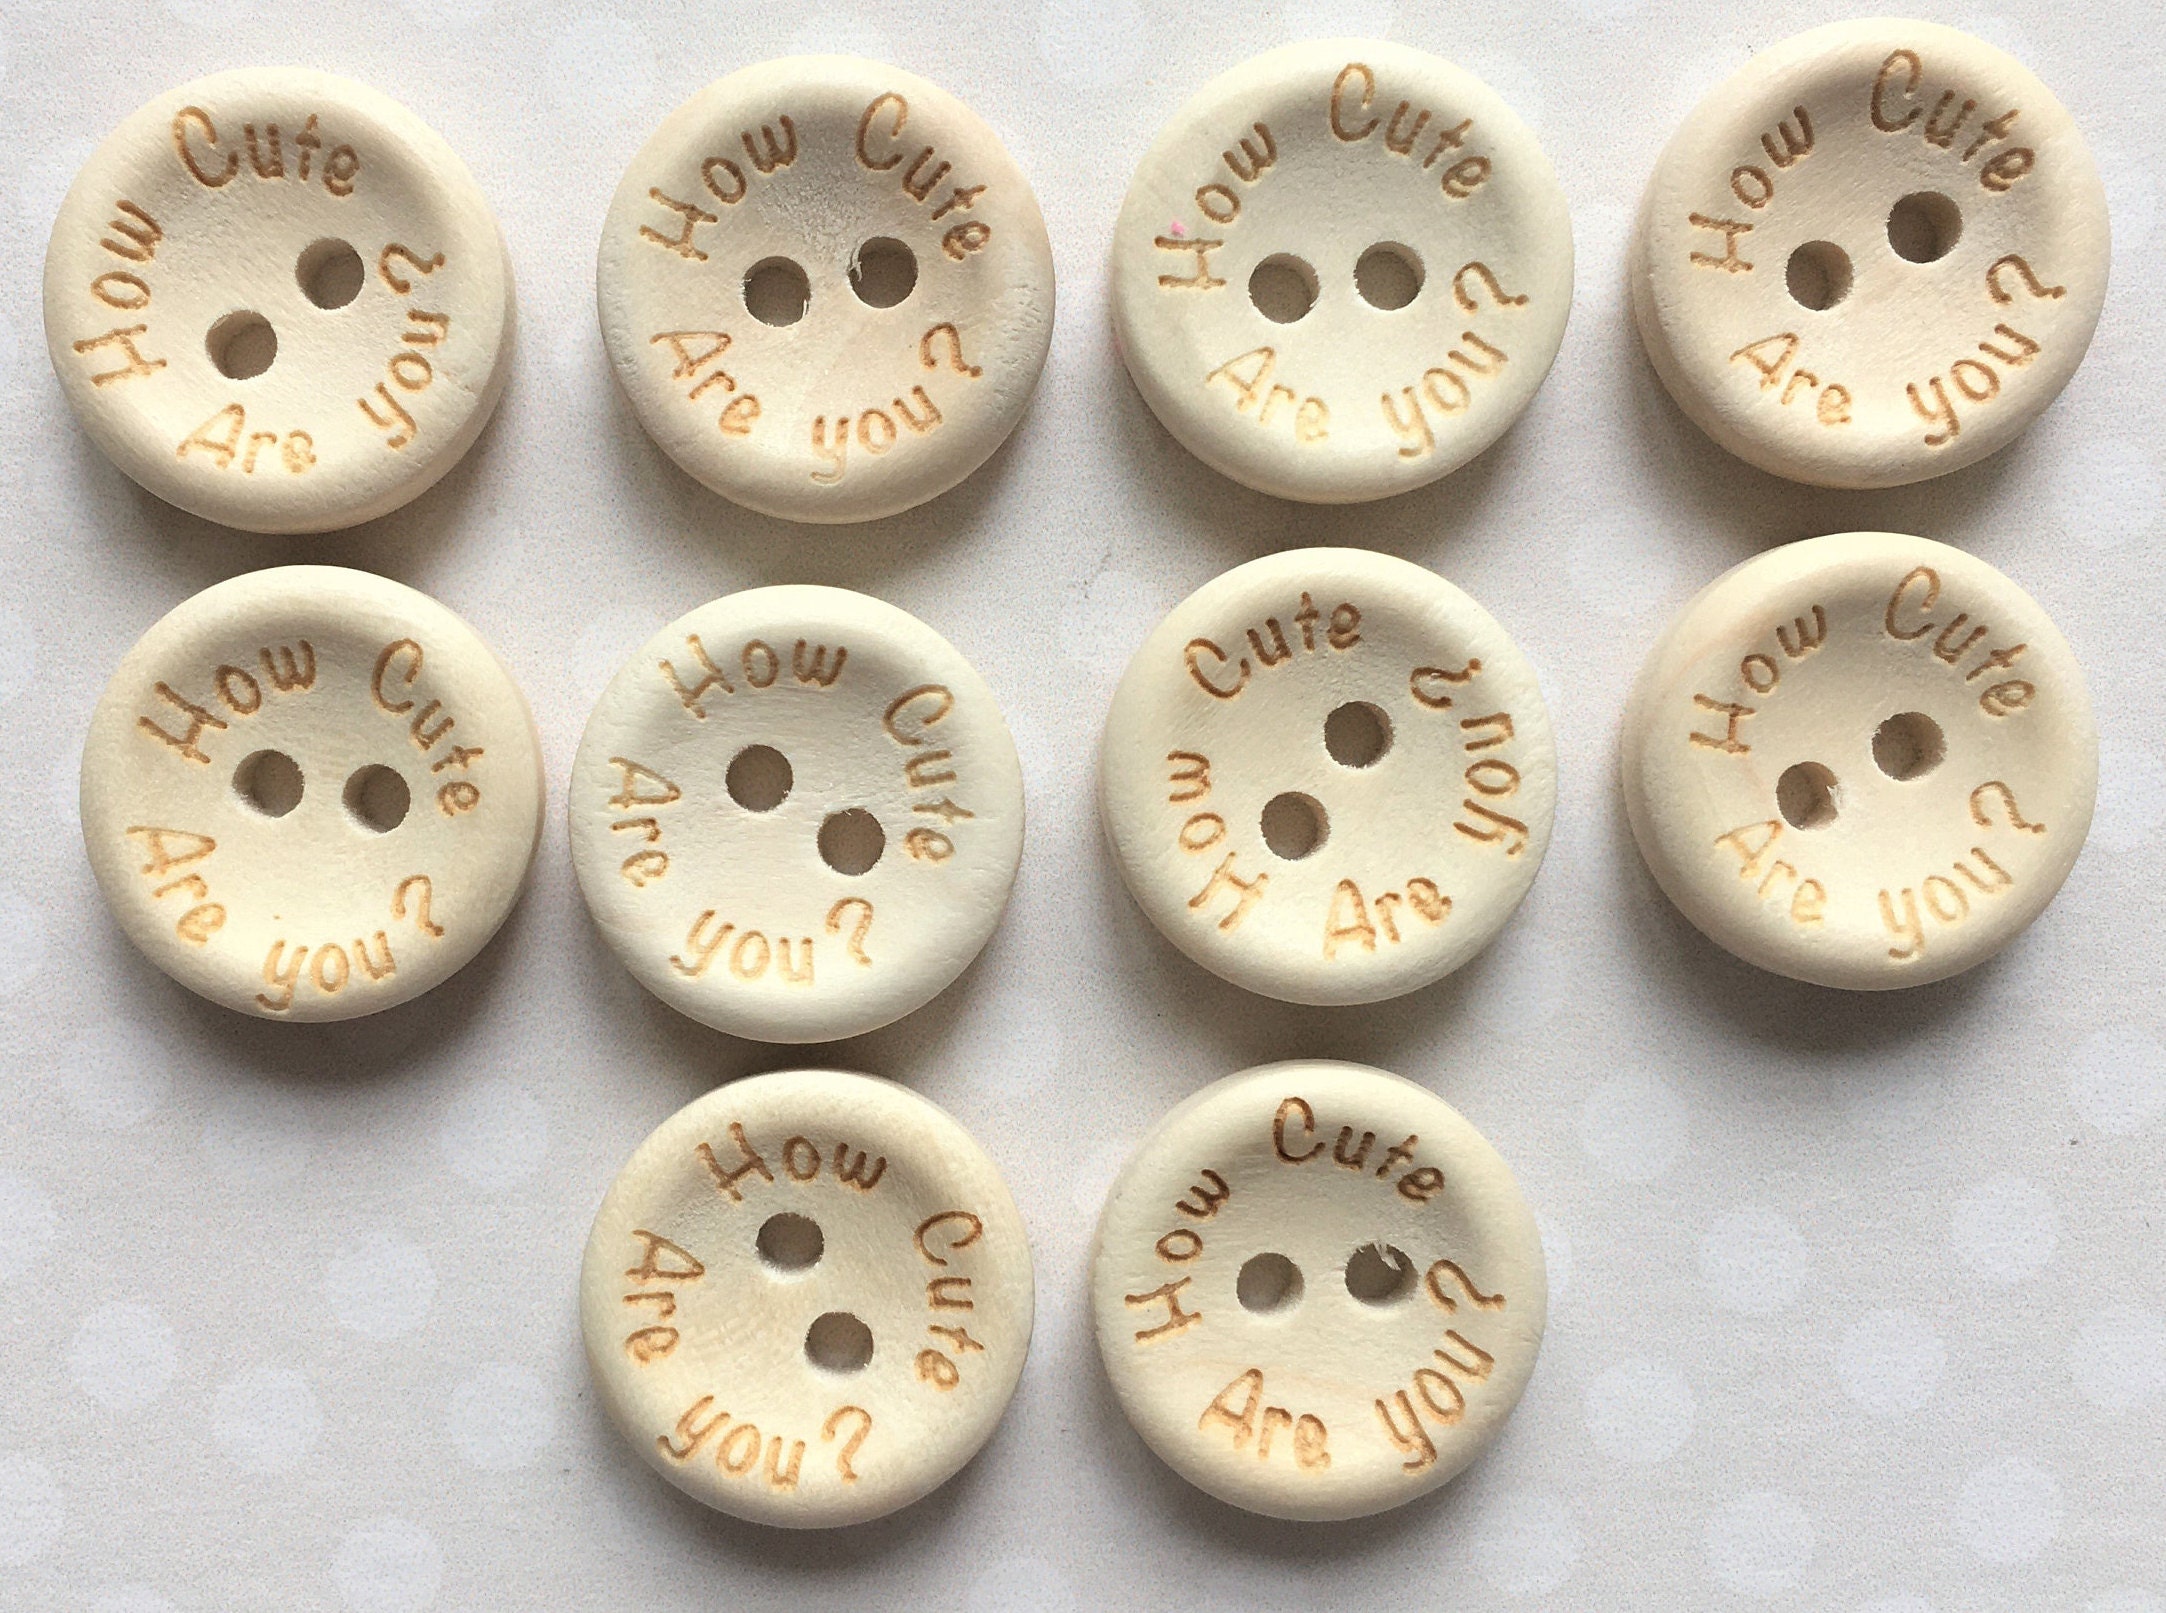 9 X 20mm HANDMADE WITH LOVE 'knitted' Wooden Buttons, Knitted